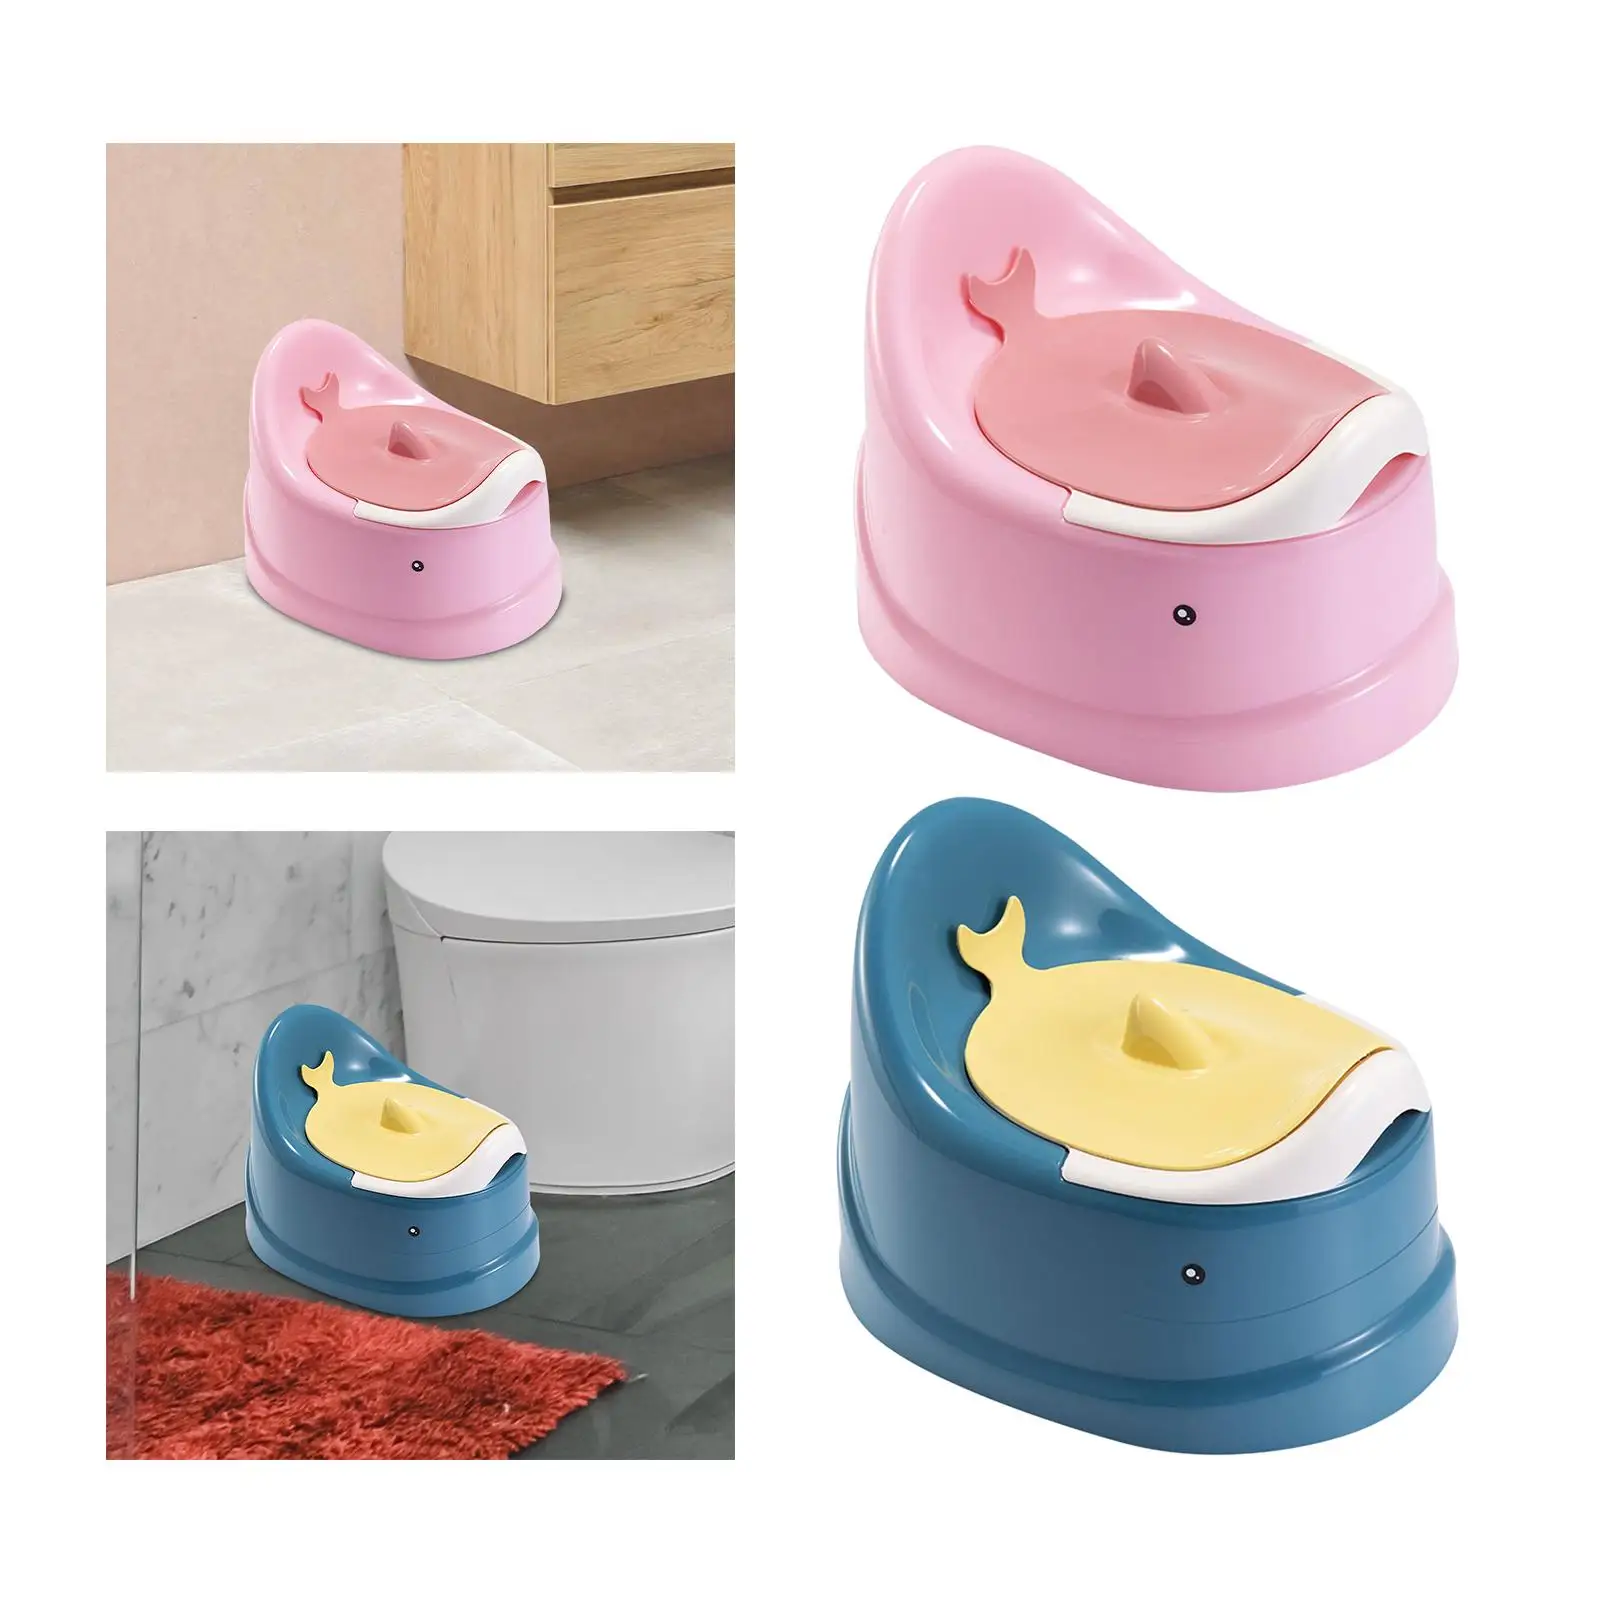 Potty Training Toilet Easy to Clean Nonslip Portable Indoor Adorable for Toddlers for Girls Boys Baby Potty Child Potty Seat